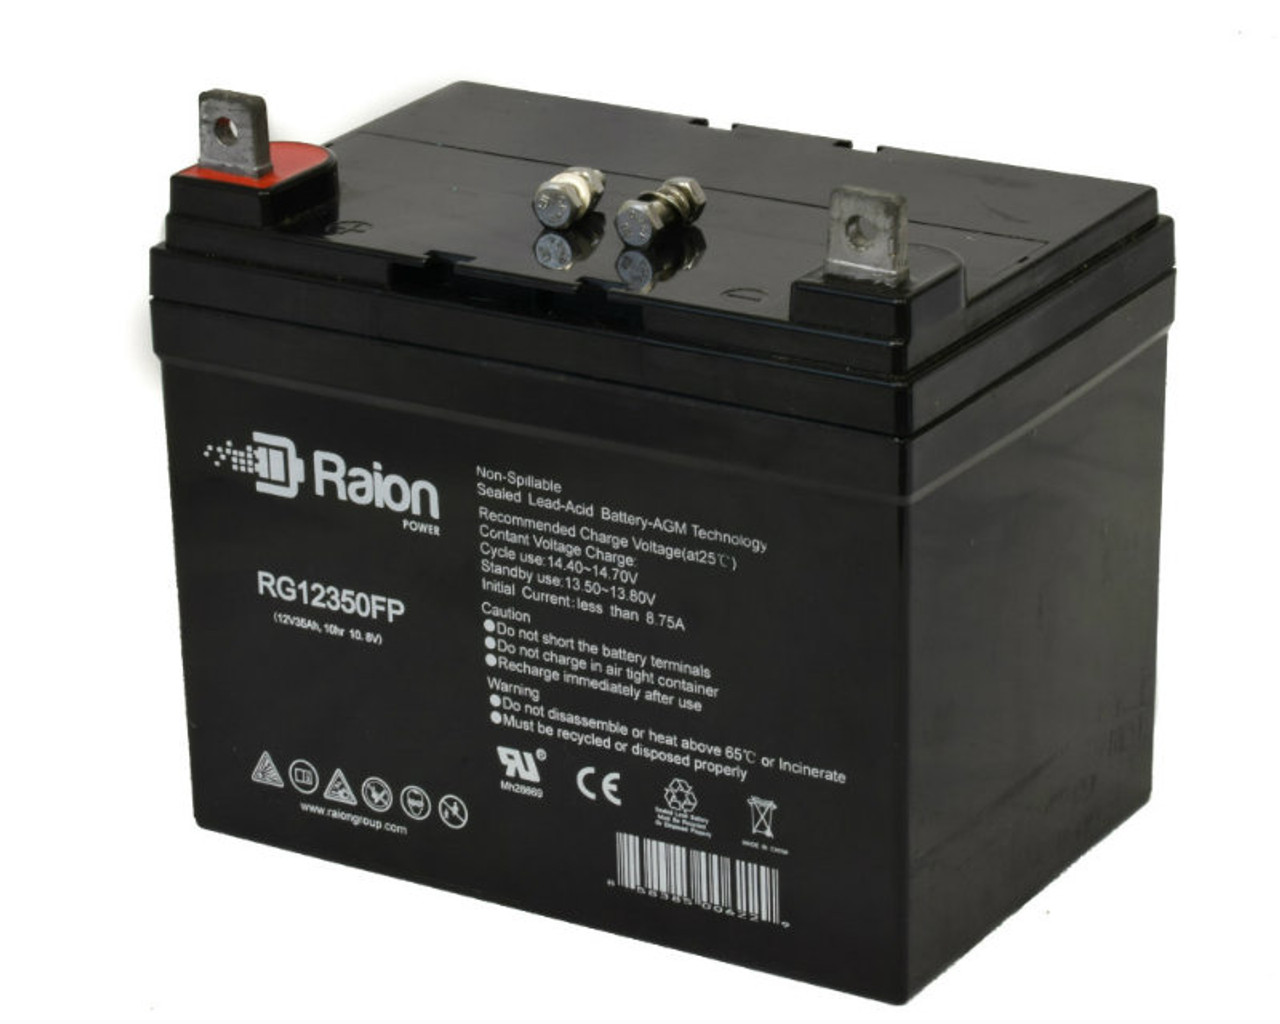 Raion Power Replacement 12V 35Ah RG12350FP Battery for Yard-Man X614G